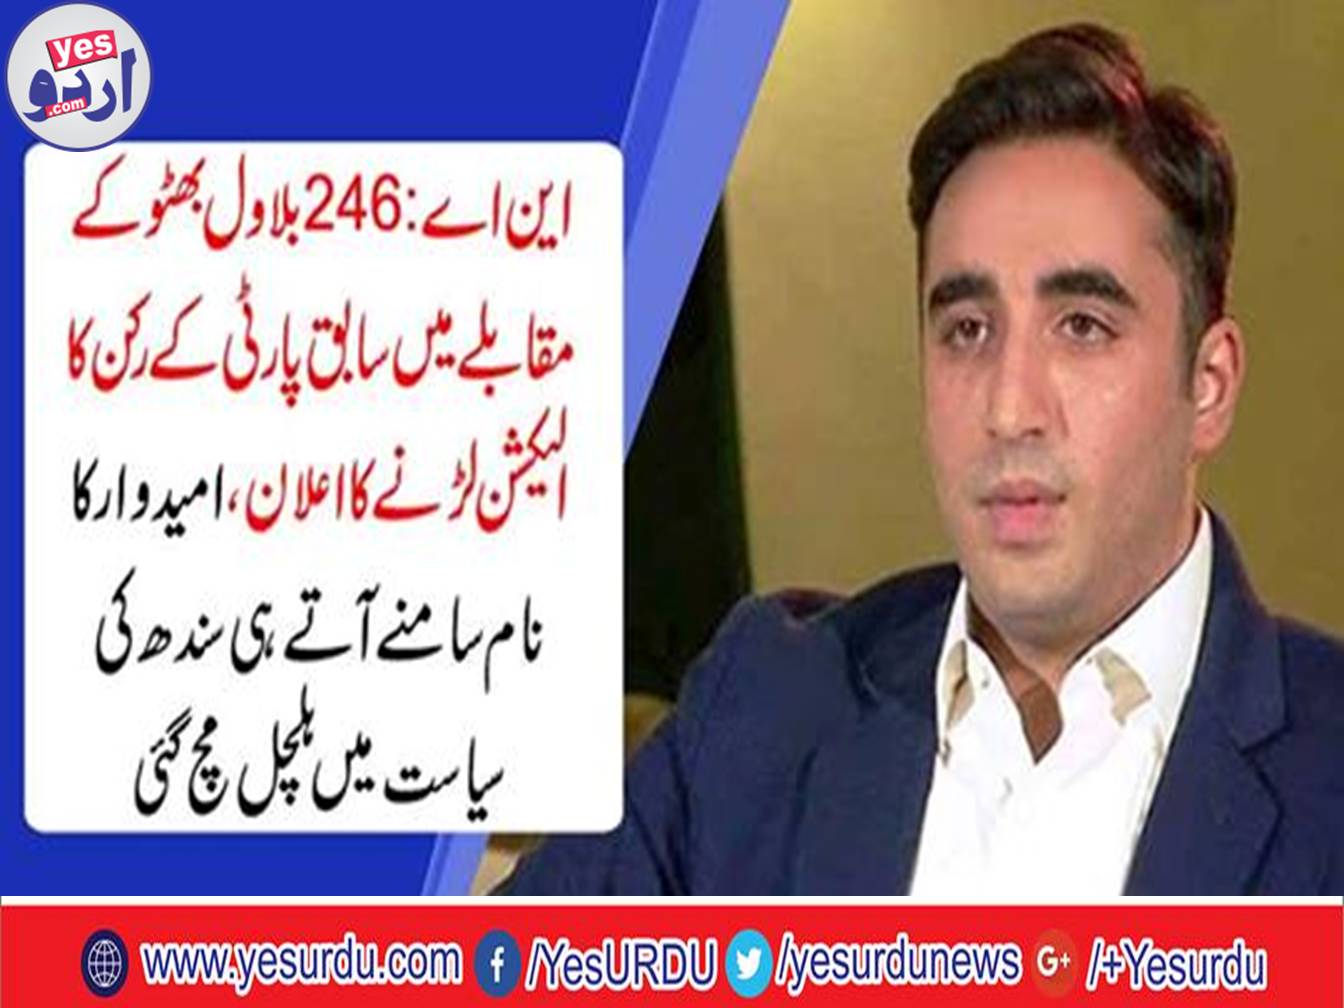 Former party member announced to contest against Bilawal Bhutto